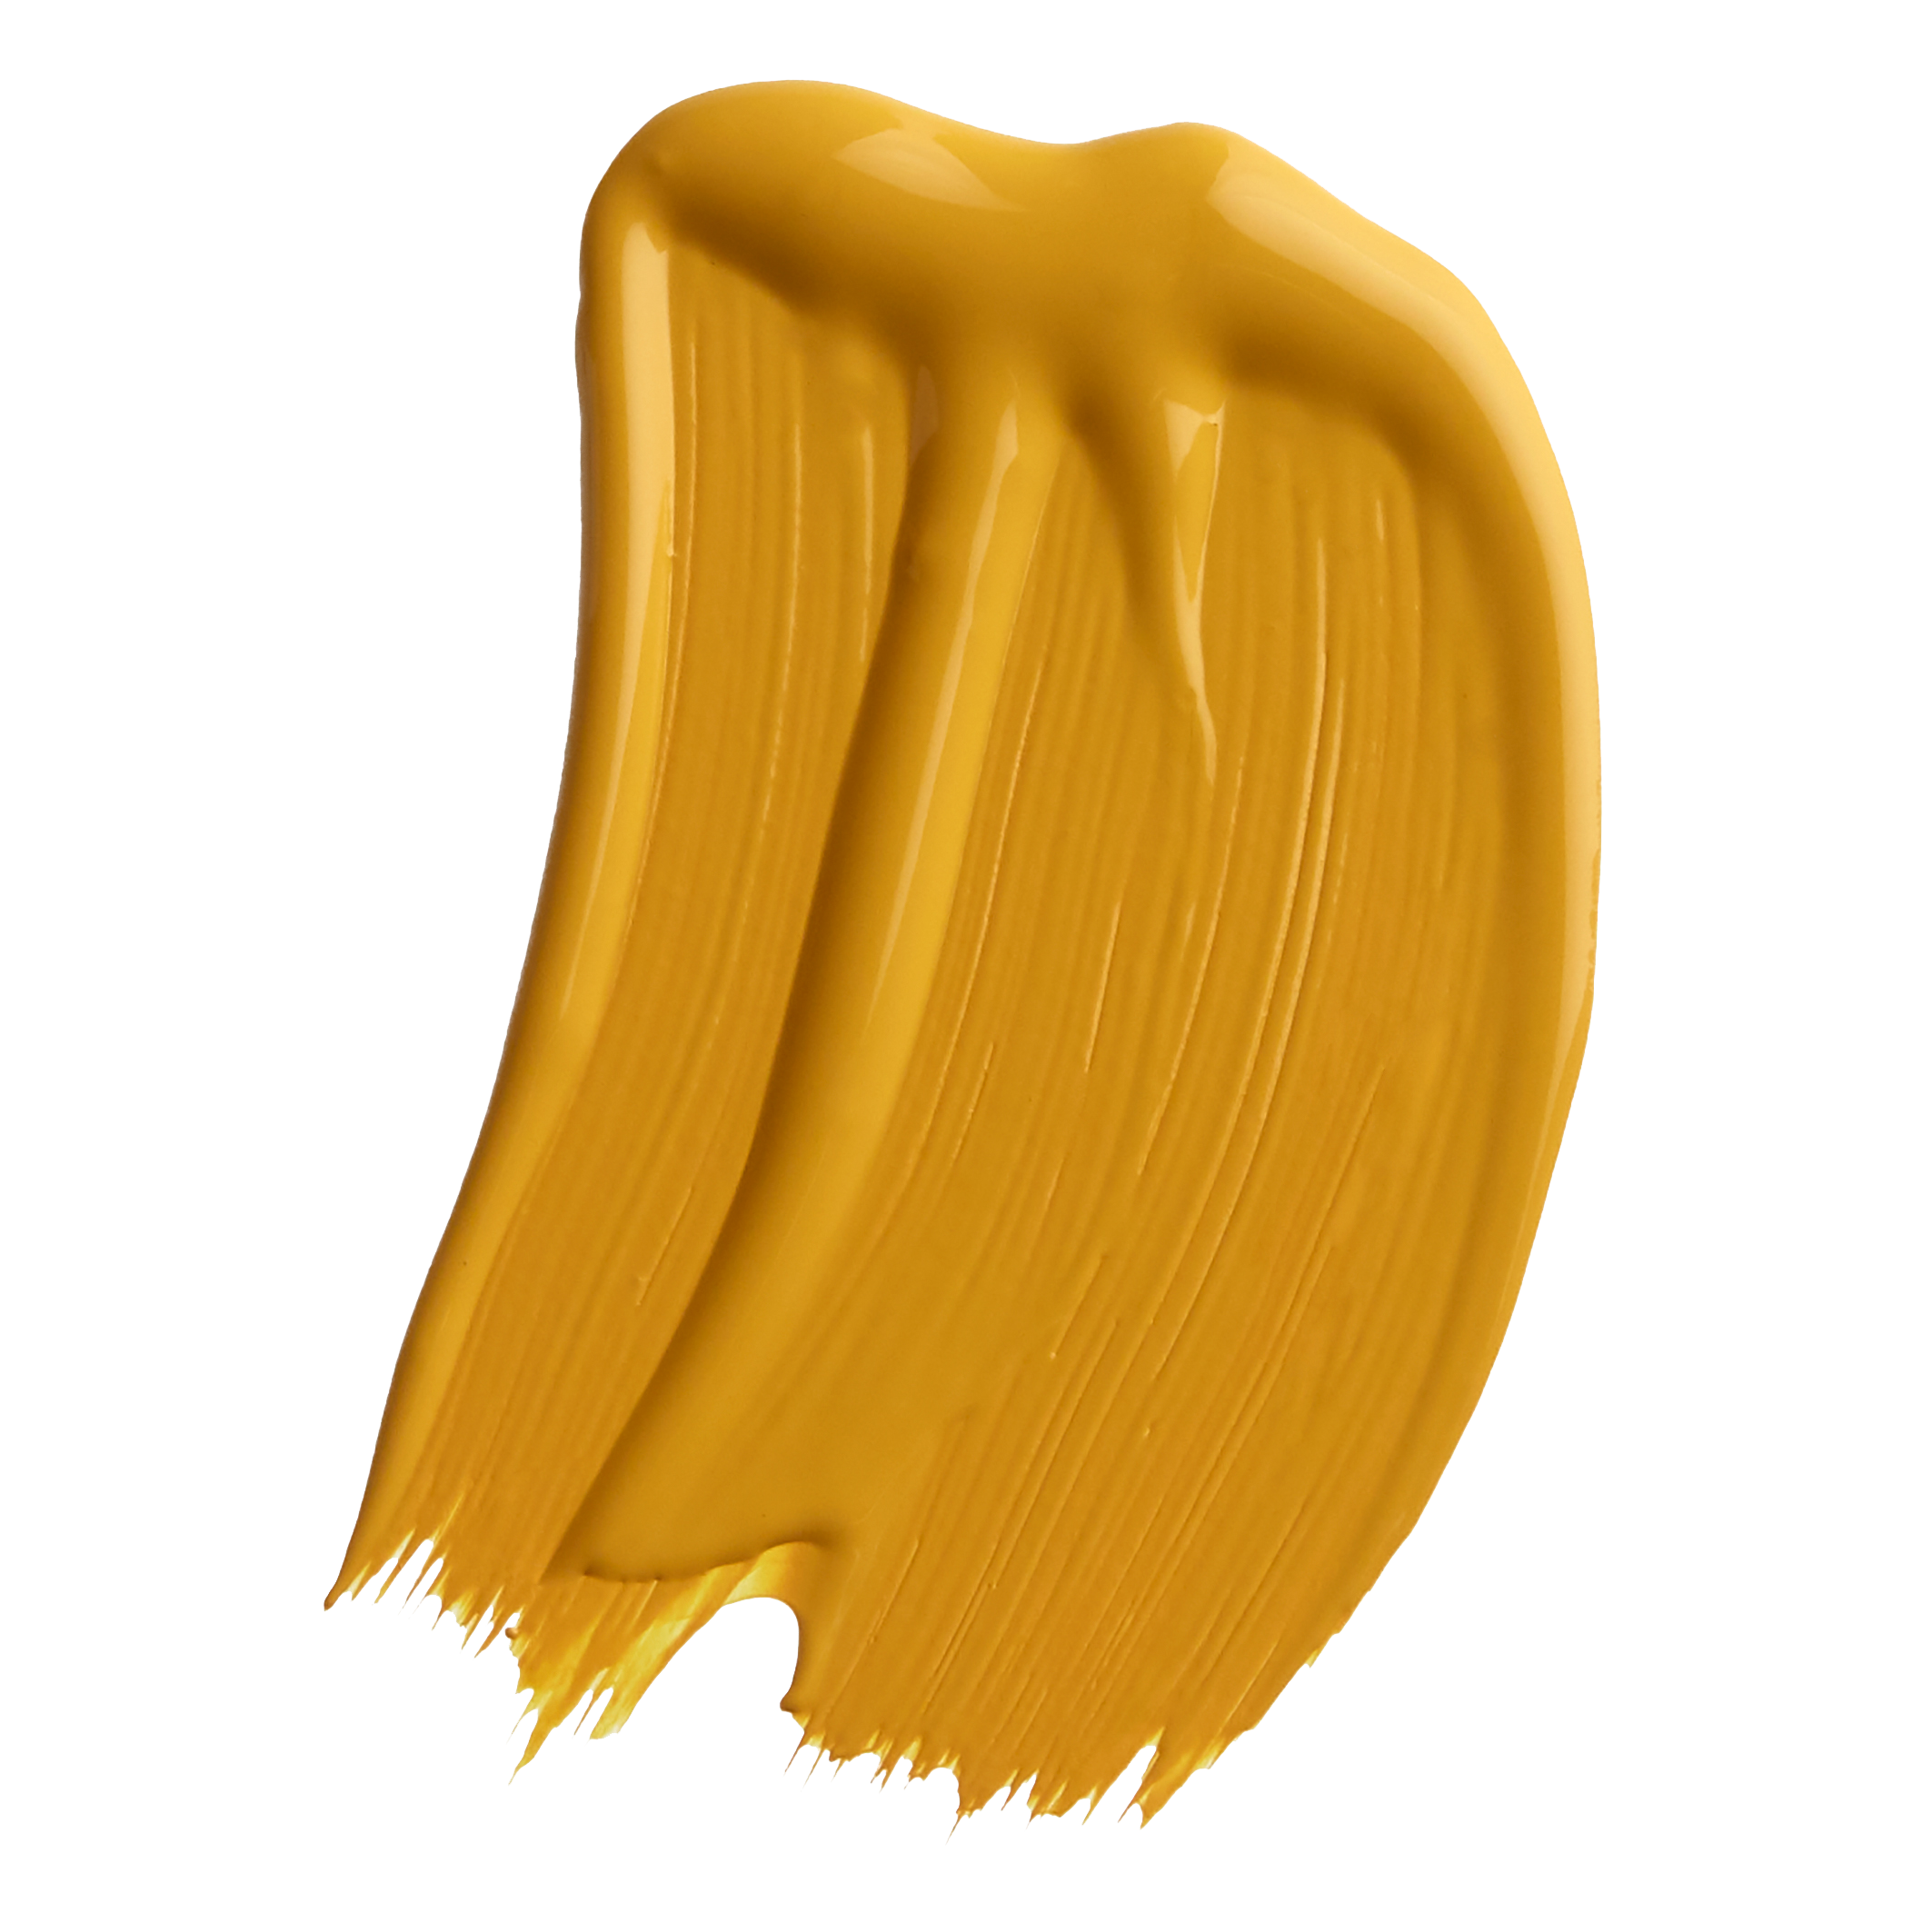 French Ochre paint